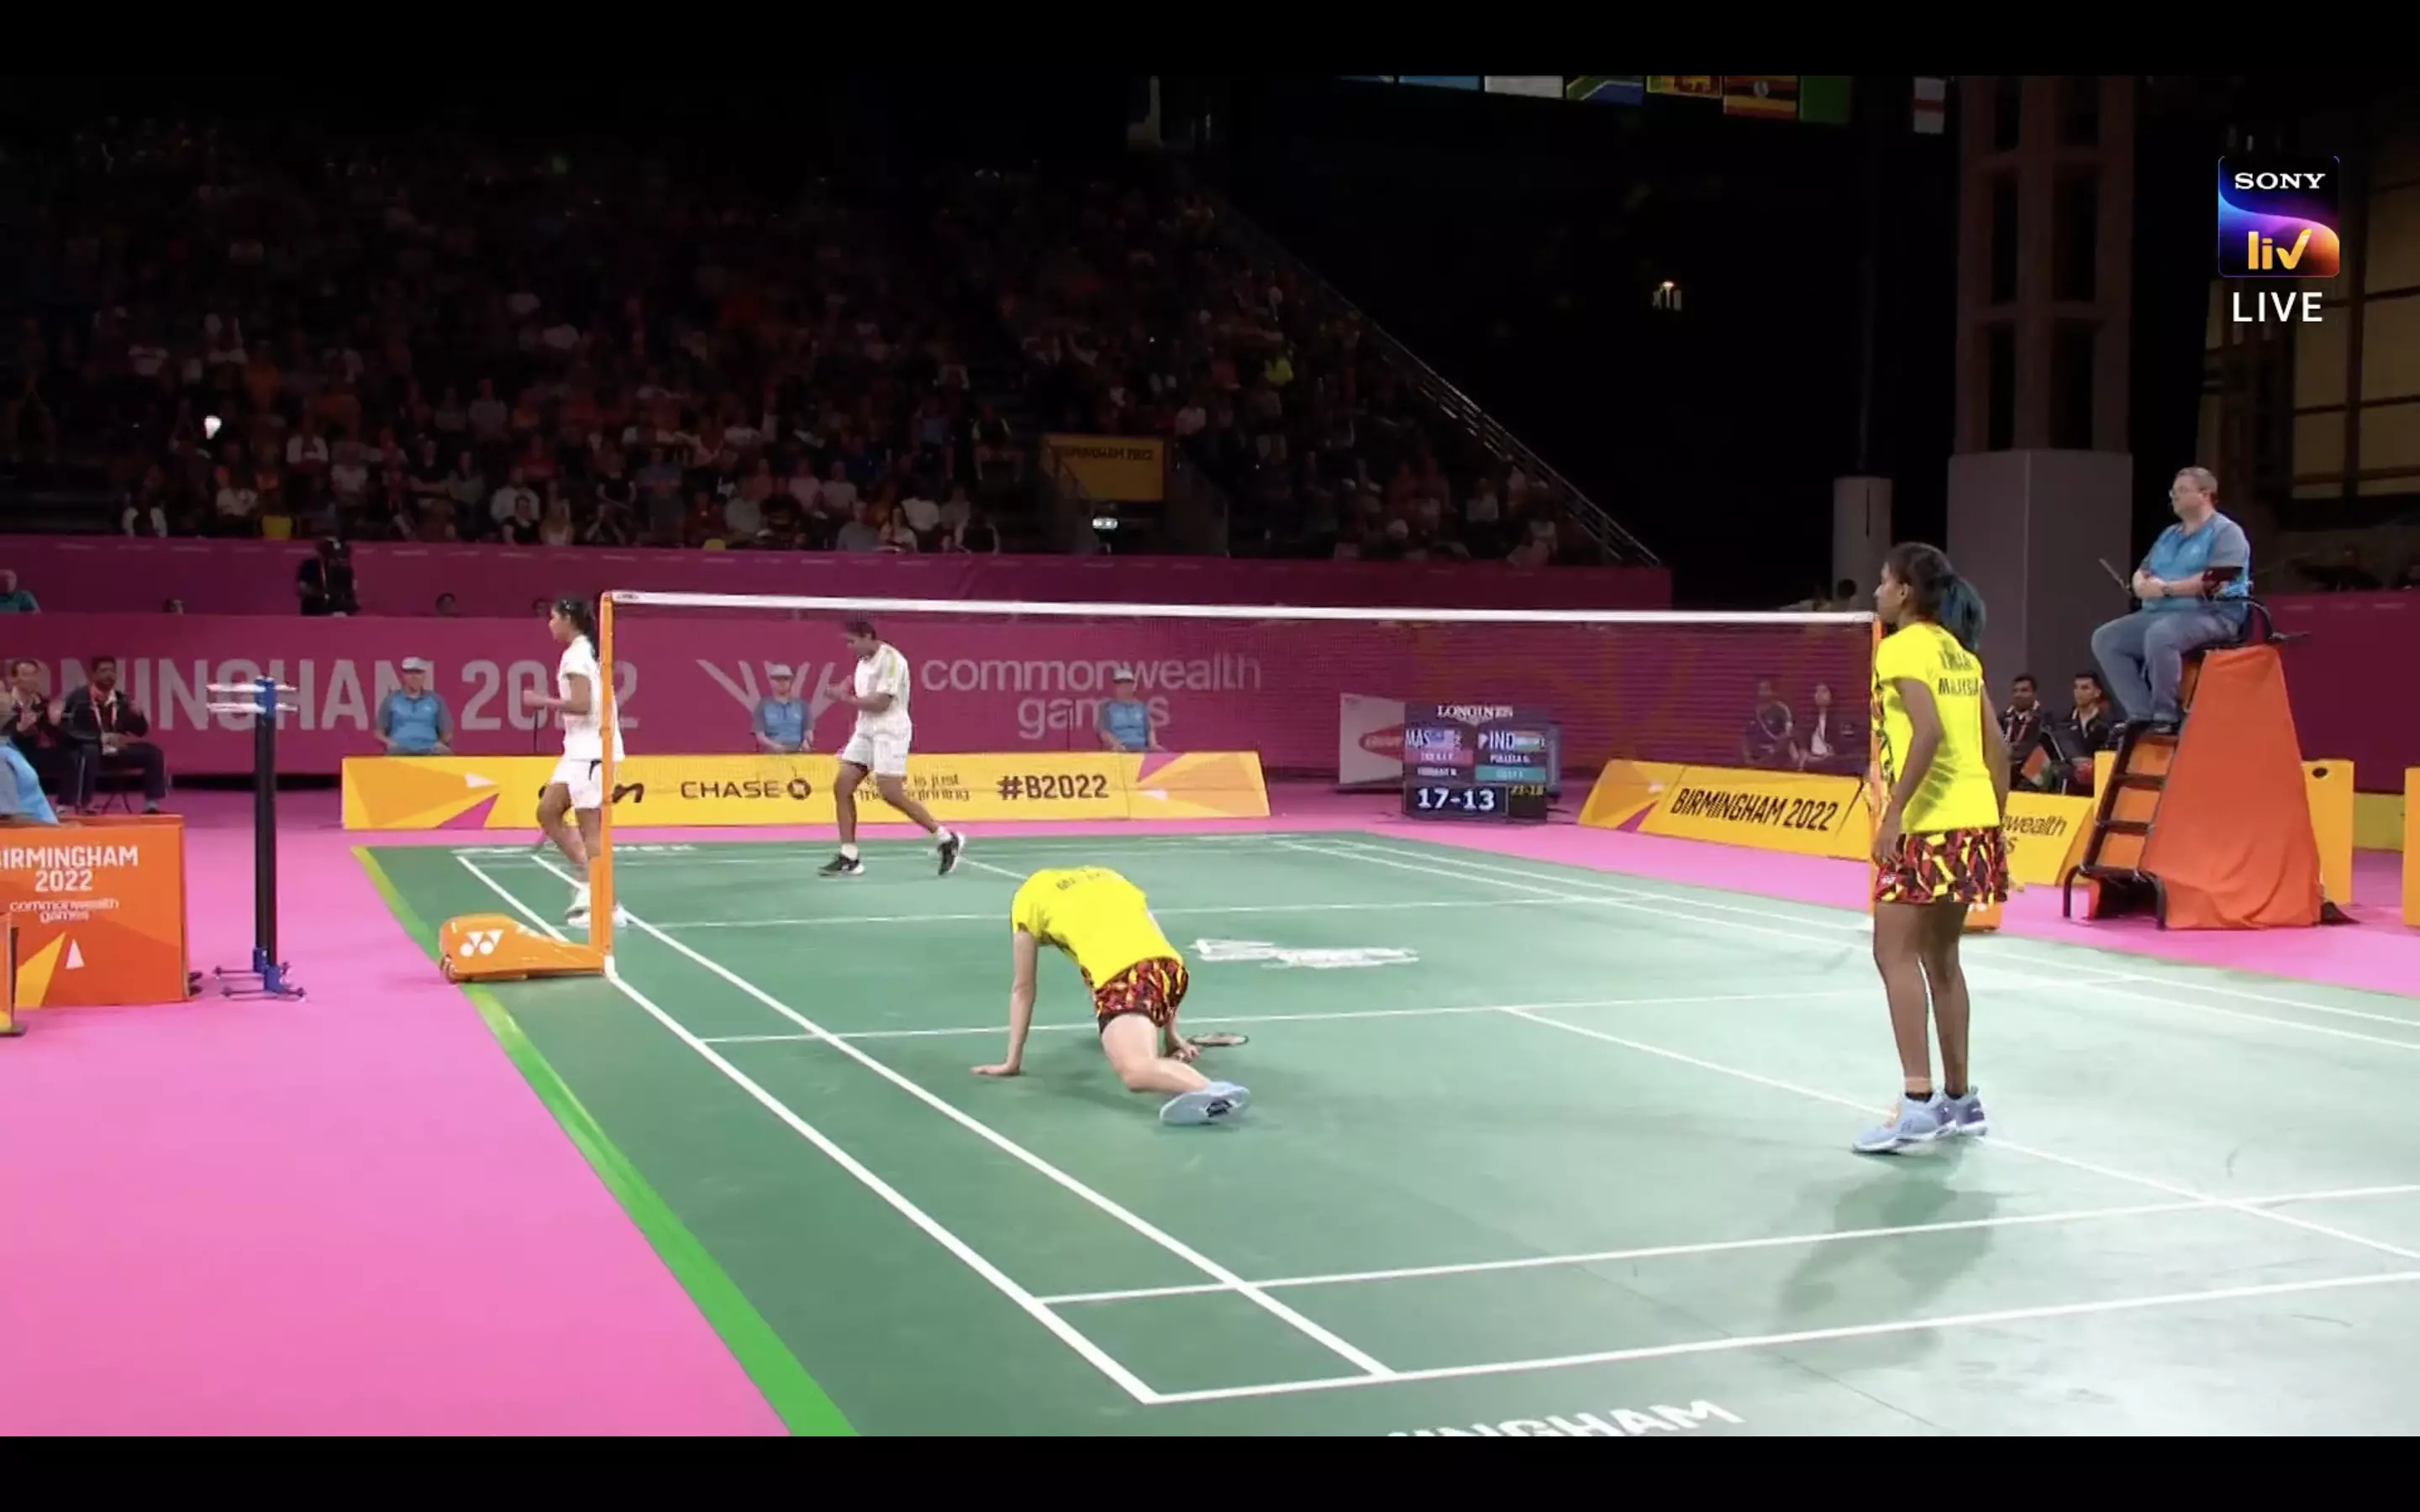 Commonwealth Games 2022 Badminton Mixed Team Finals LIVE India lose to Malaysia, wins silver — Scores, Medal, Updates, Blog